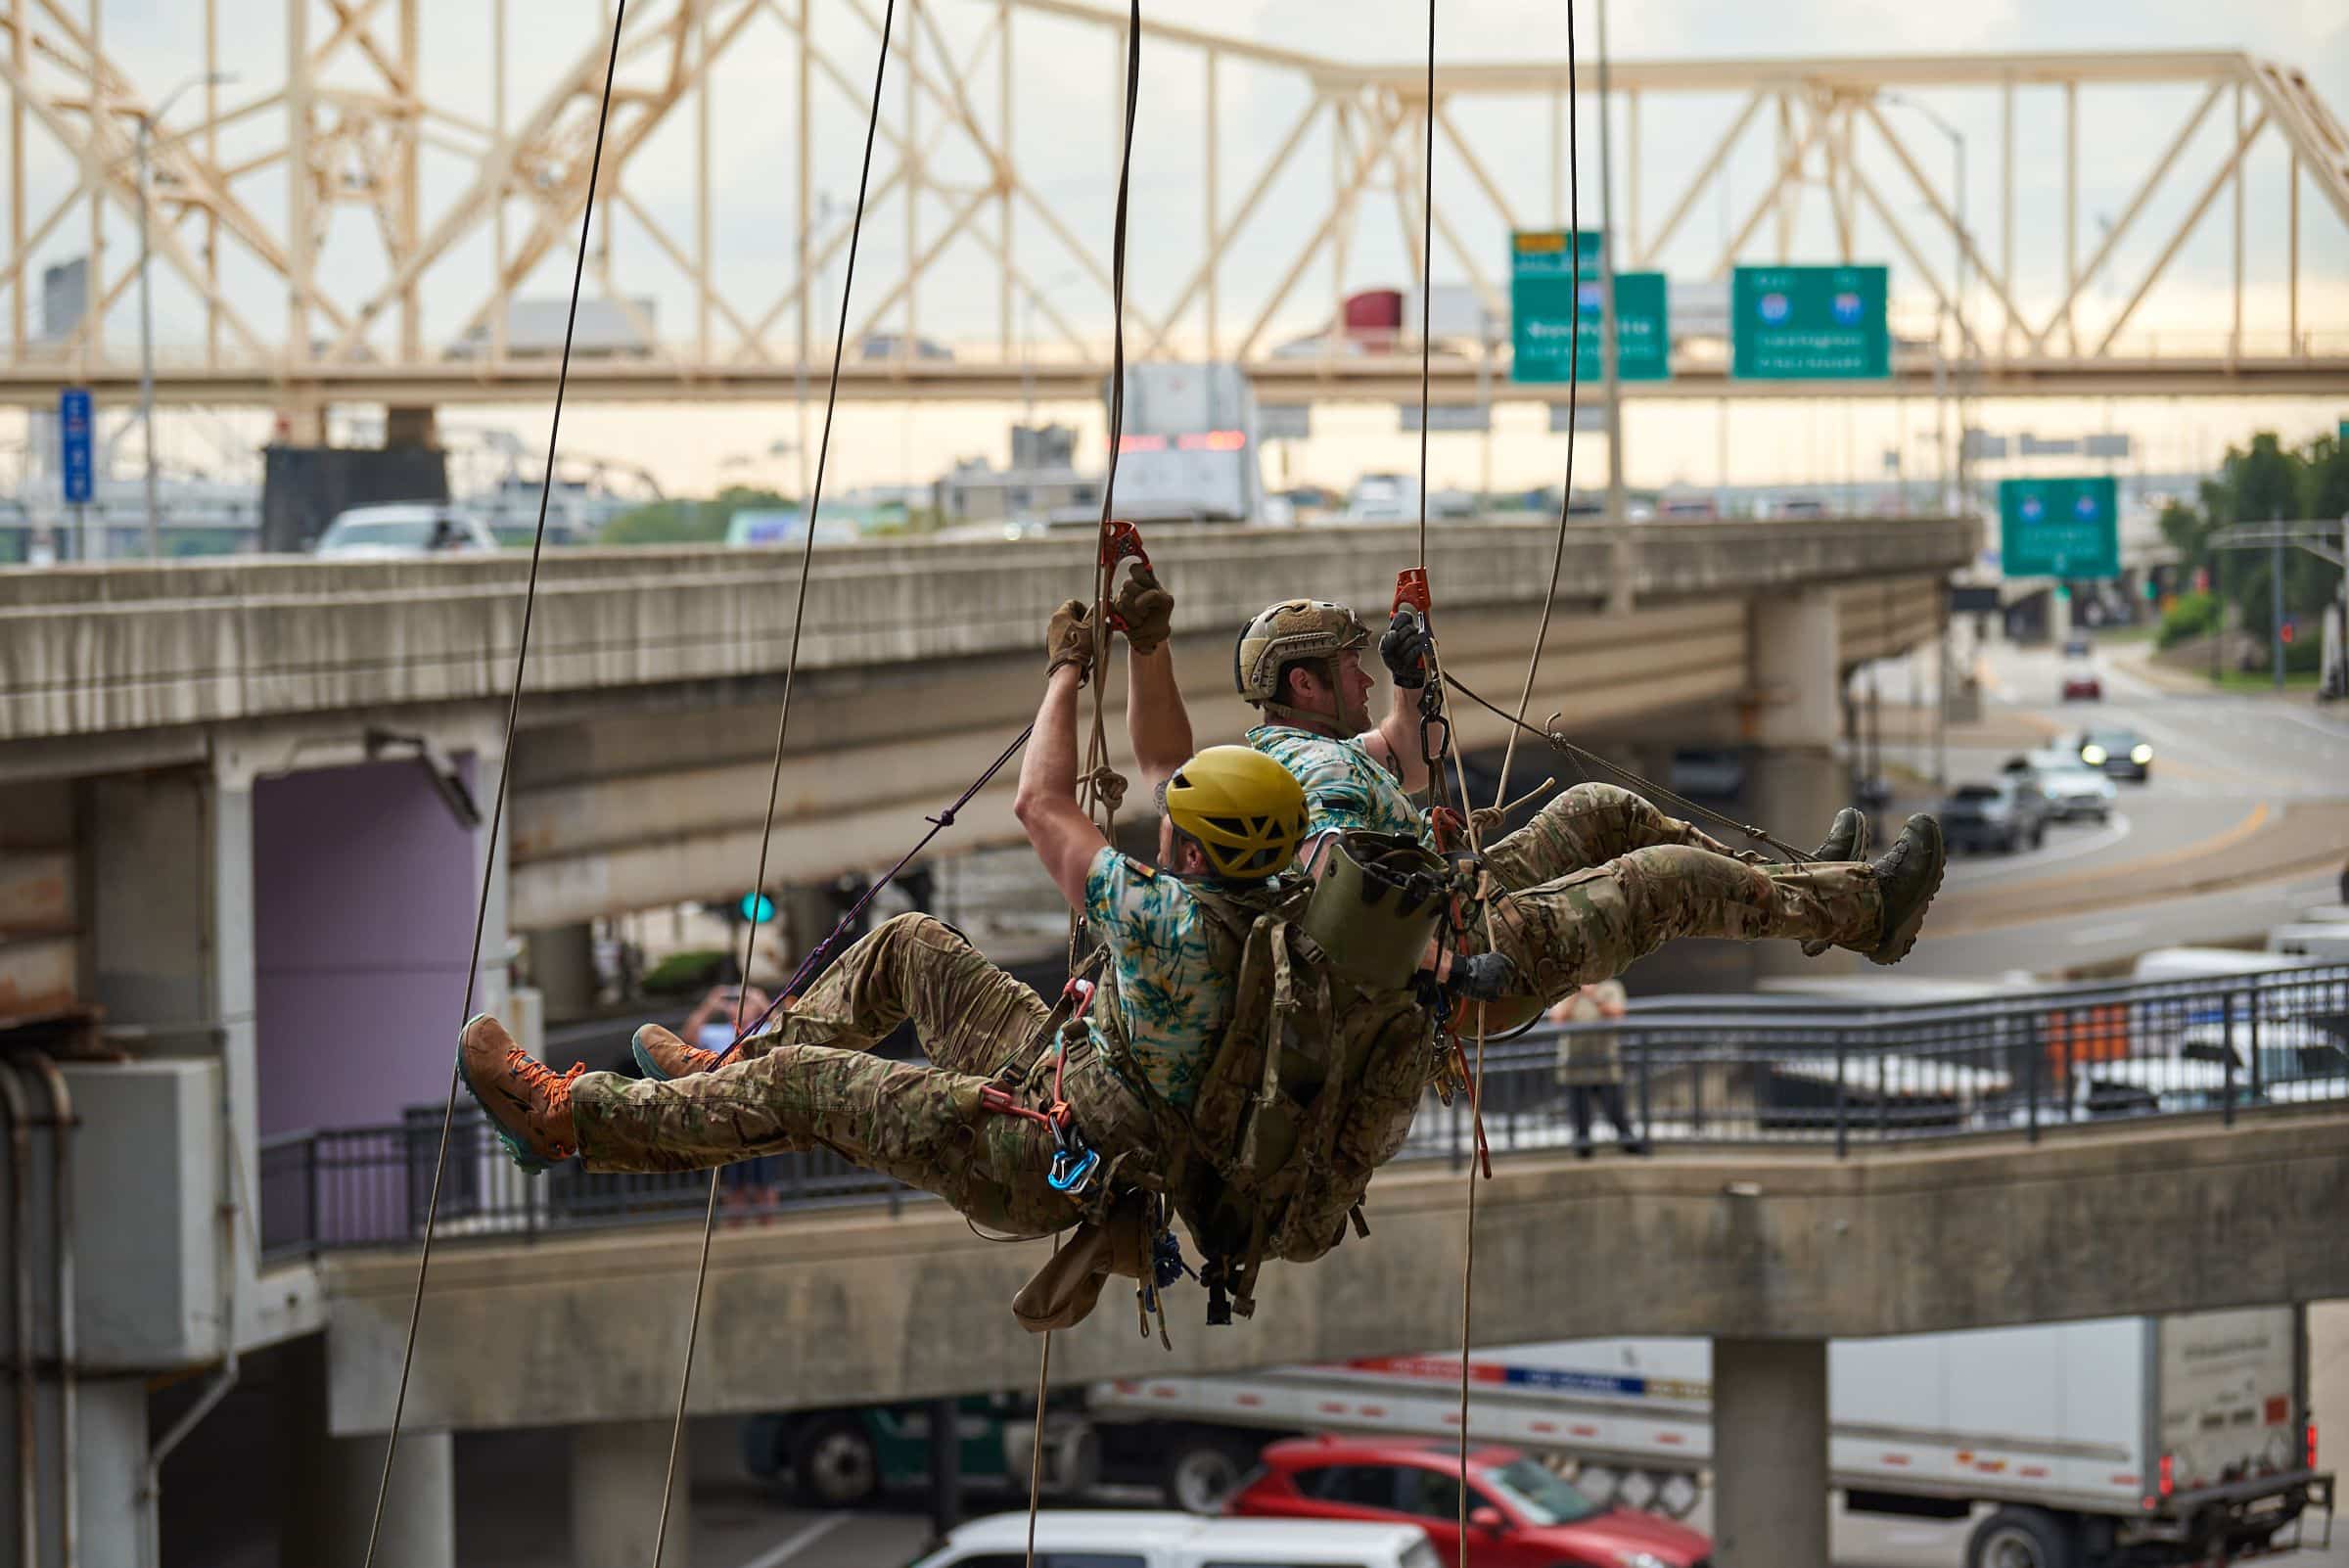 U.S. Air Force pararescuemen execute an urban high-angle ropes scenario to reach a simulated injured service member, render medical care, and lower him to safety during the PJ Rodeo competition in Louisville, Ky., Sept. 6, 2023. The biennial event, which tests the capabilities of pararescue Airmen across the service, was hosted by the Kentucky Air National Guard’s 123rd Special Tactics Squadron. (U.S. Air National Guard photo by Phil Speck)